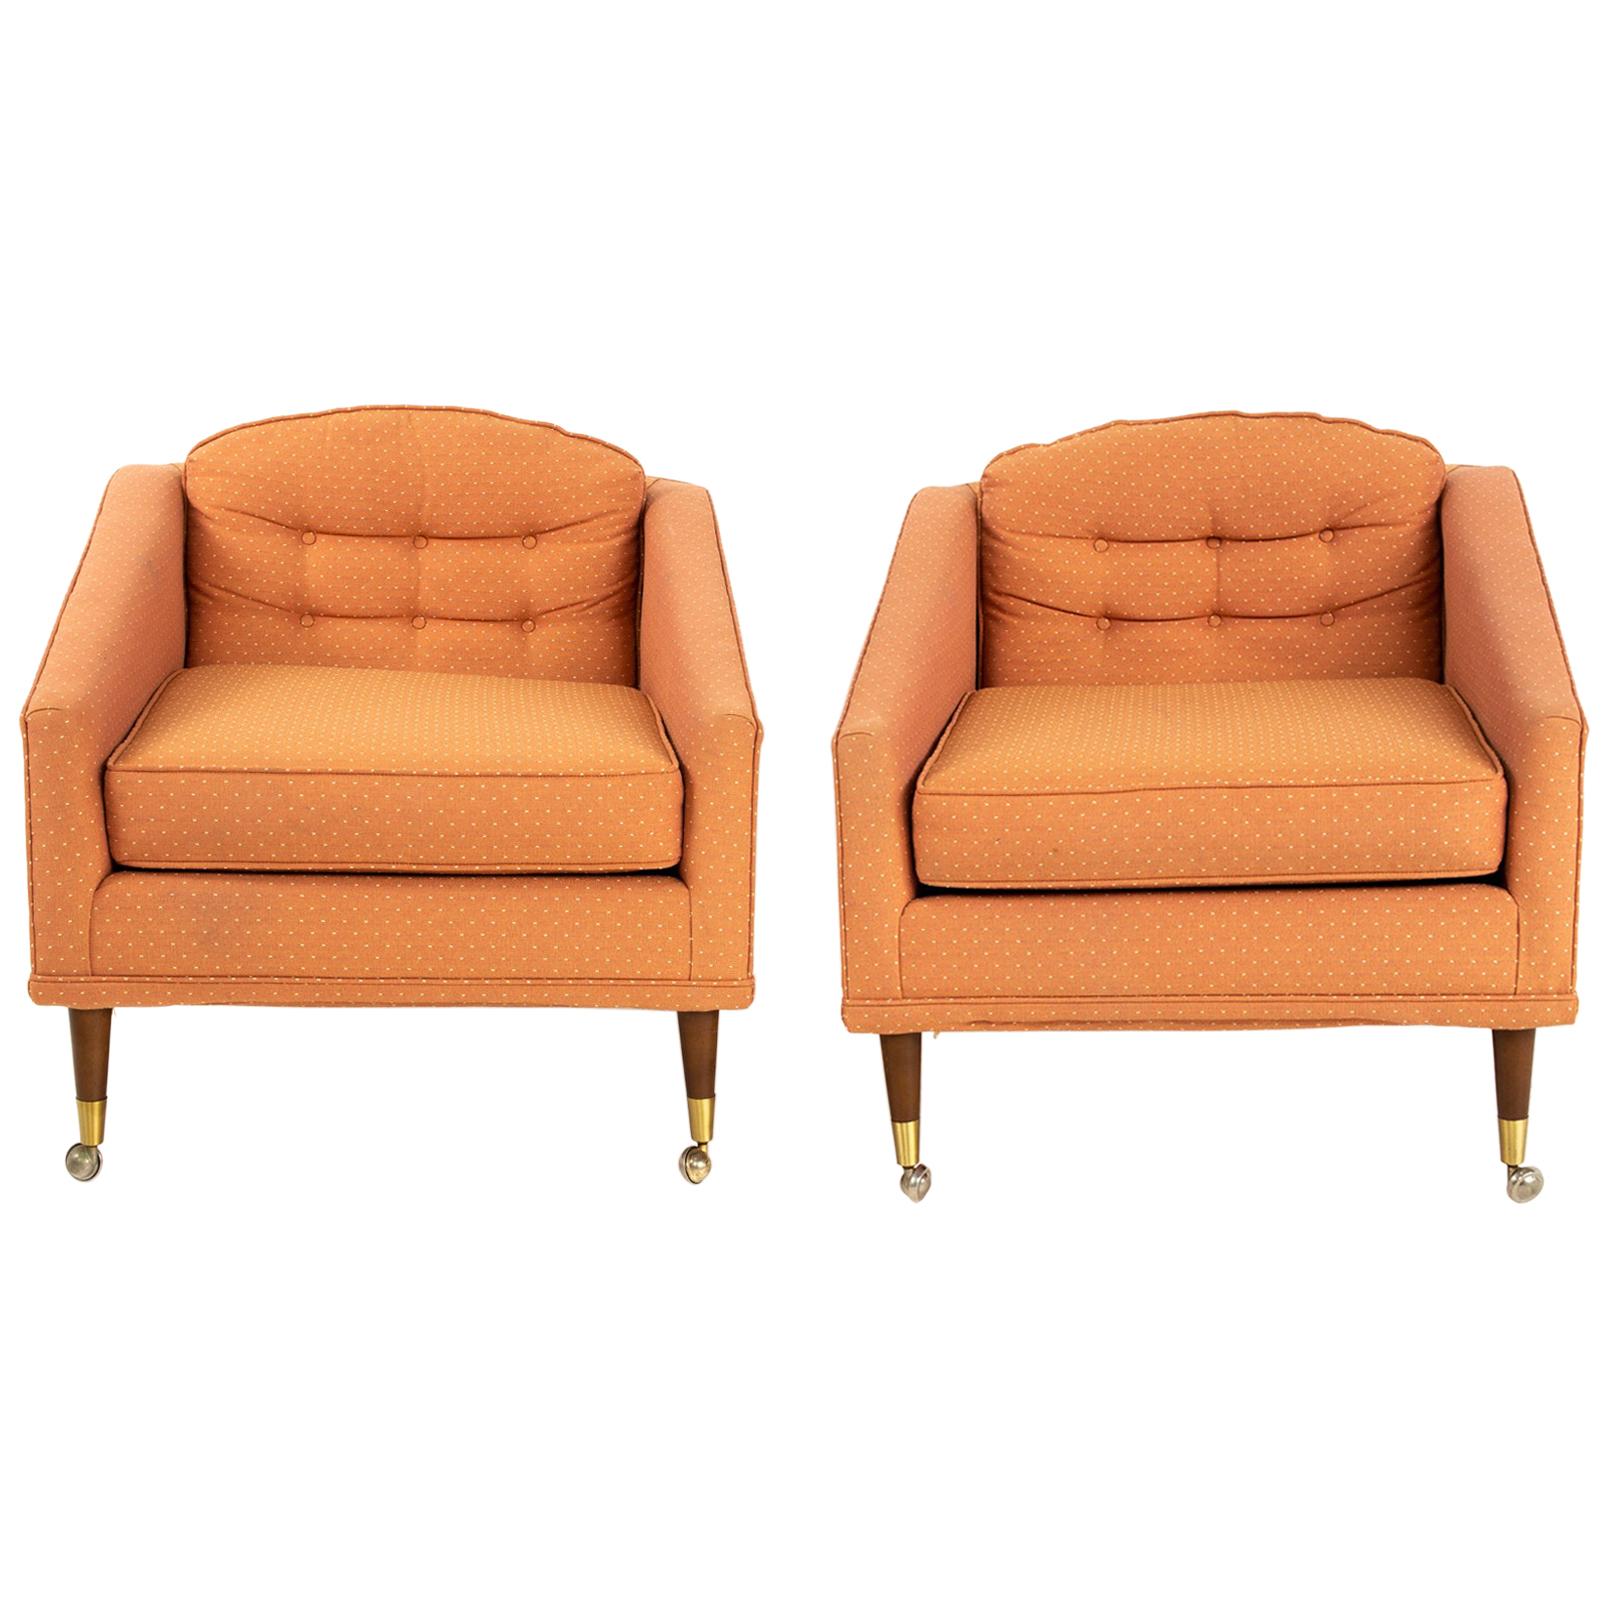 Milo Baughman style Kroehler mid century lounge chairs - pair
Each chair measures: 26 wide x 25 deep x 28.5 inches high, with a seat height of 16.5 inches

All pieces of furniture can be had in what we call restored vintage condition. That means